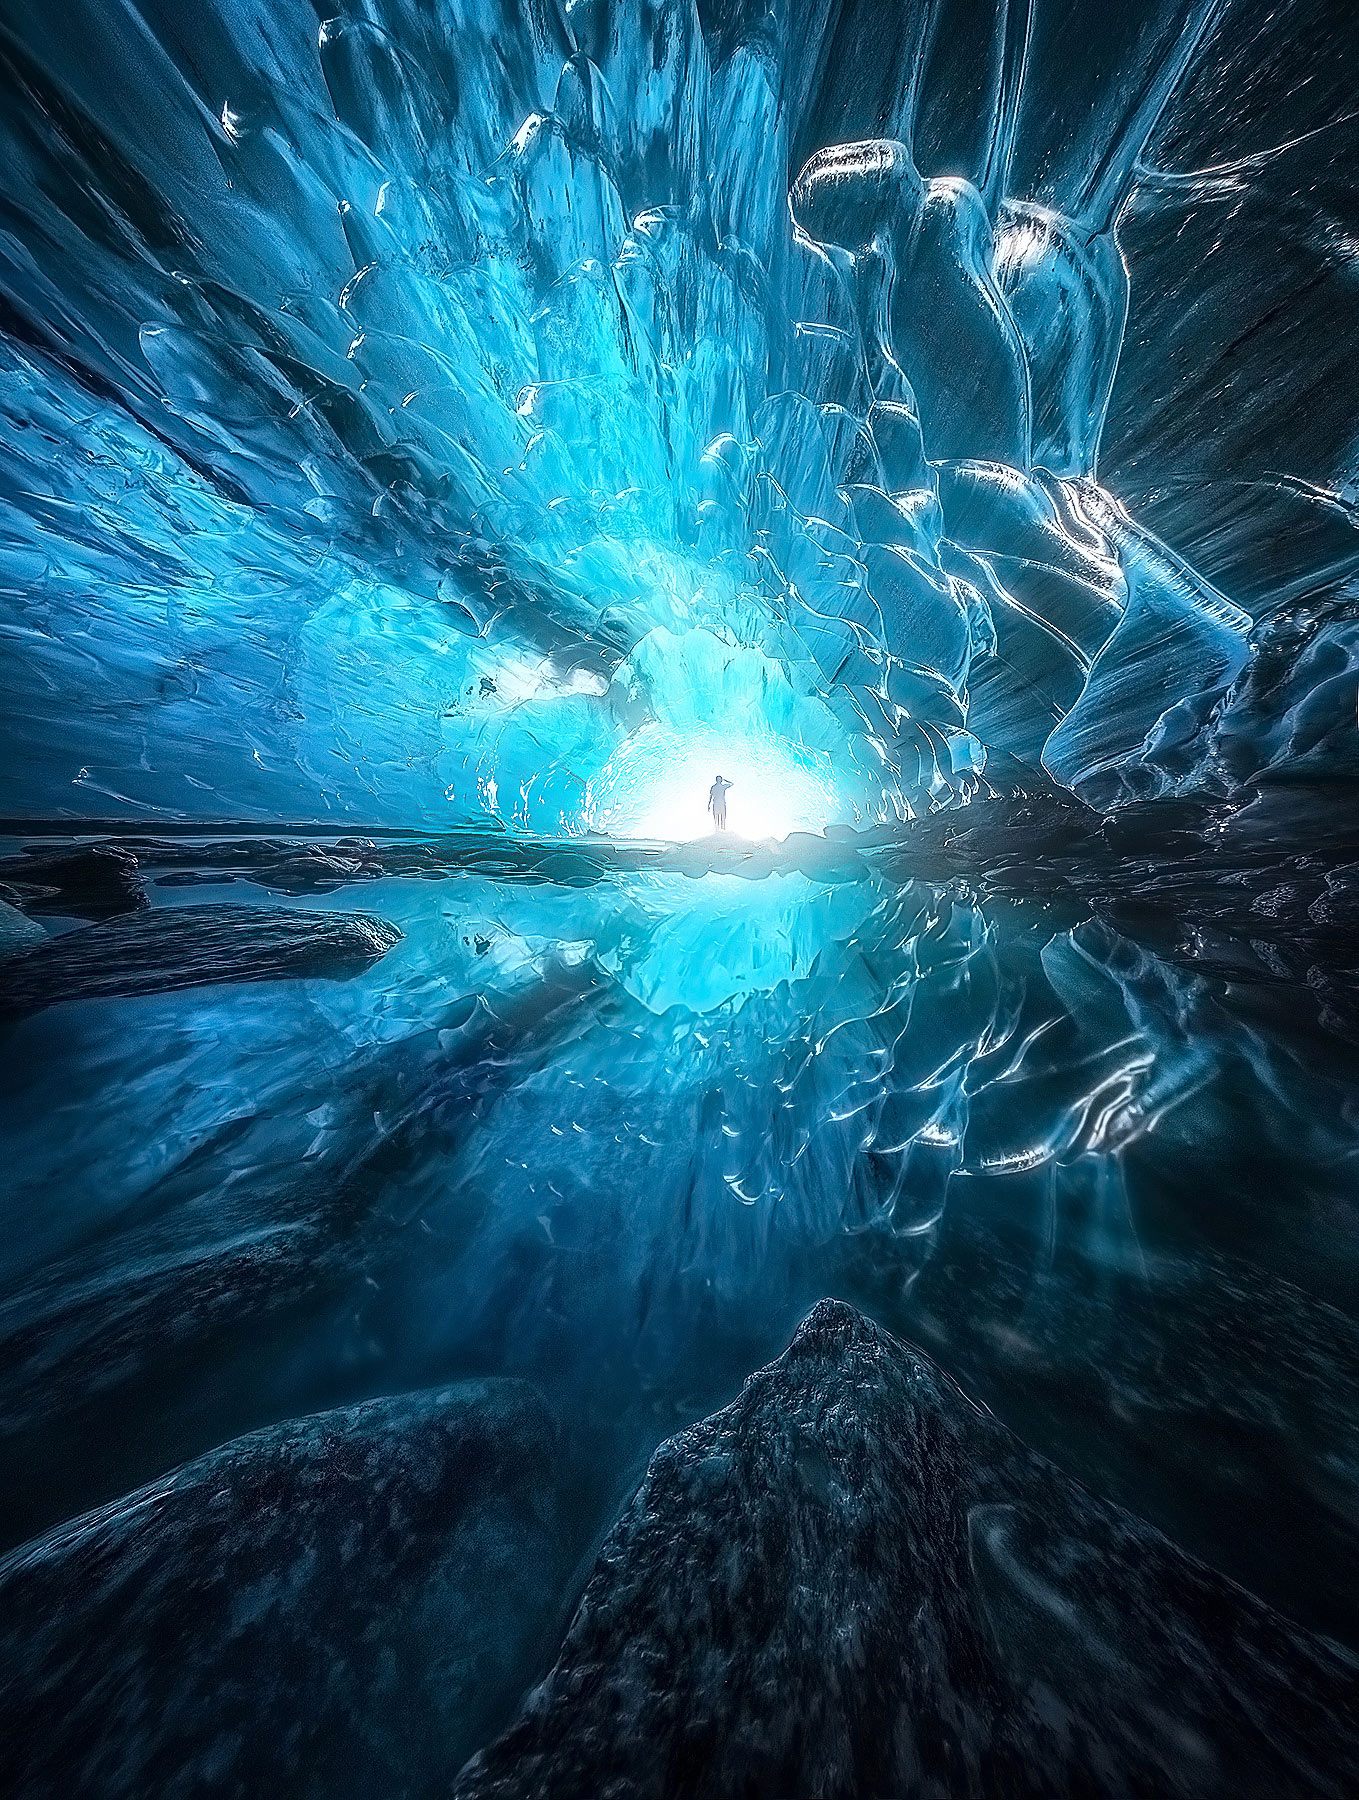 An icy reflection and self portrait from inside the depths of a glacier..